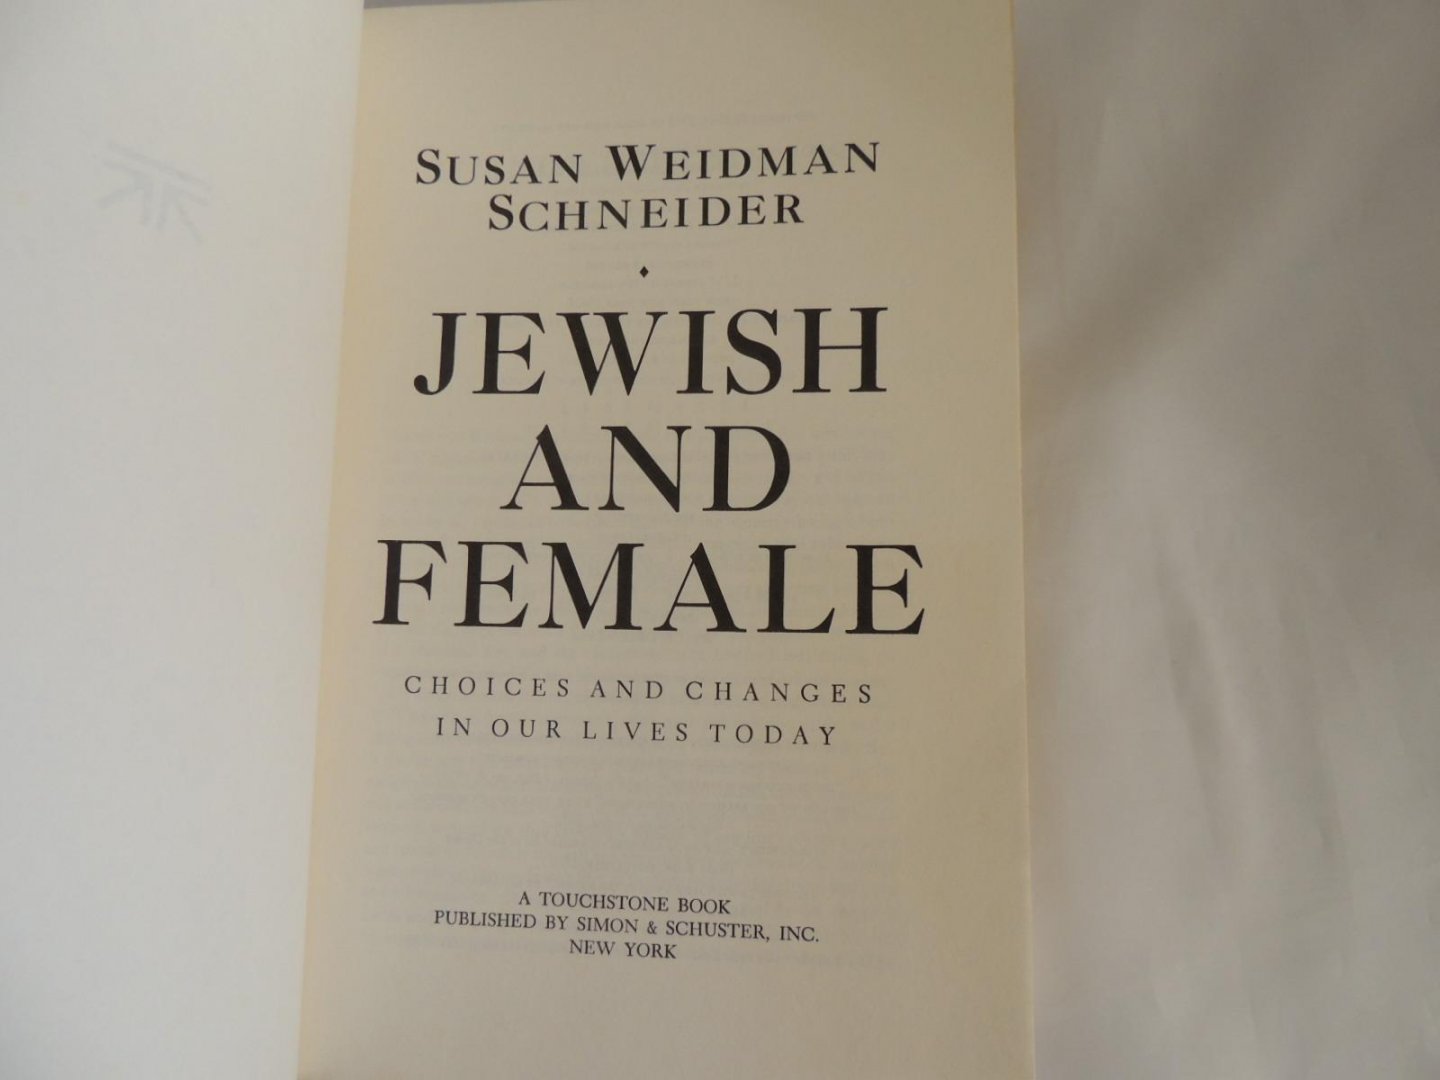 WEIDMAN SCHNEIDER, SUSAN - Jewish and female. Choices and changes in our lives today. - a guide and sourcebook for today's jewish woman